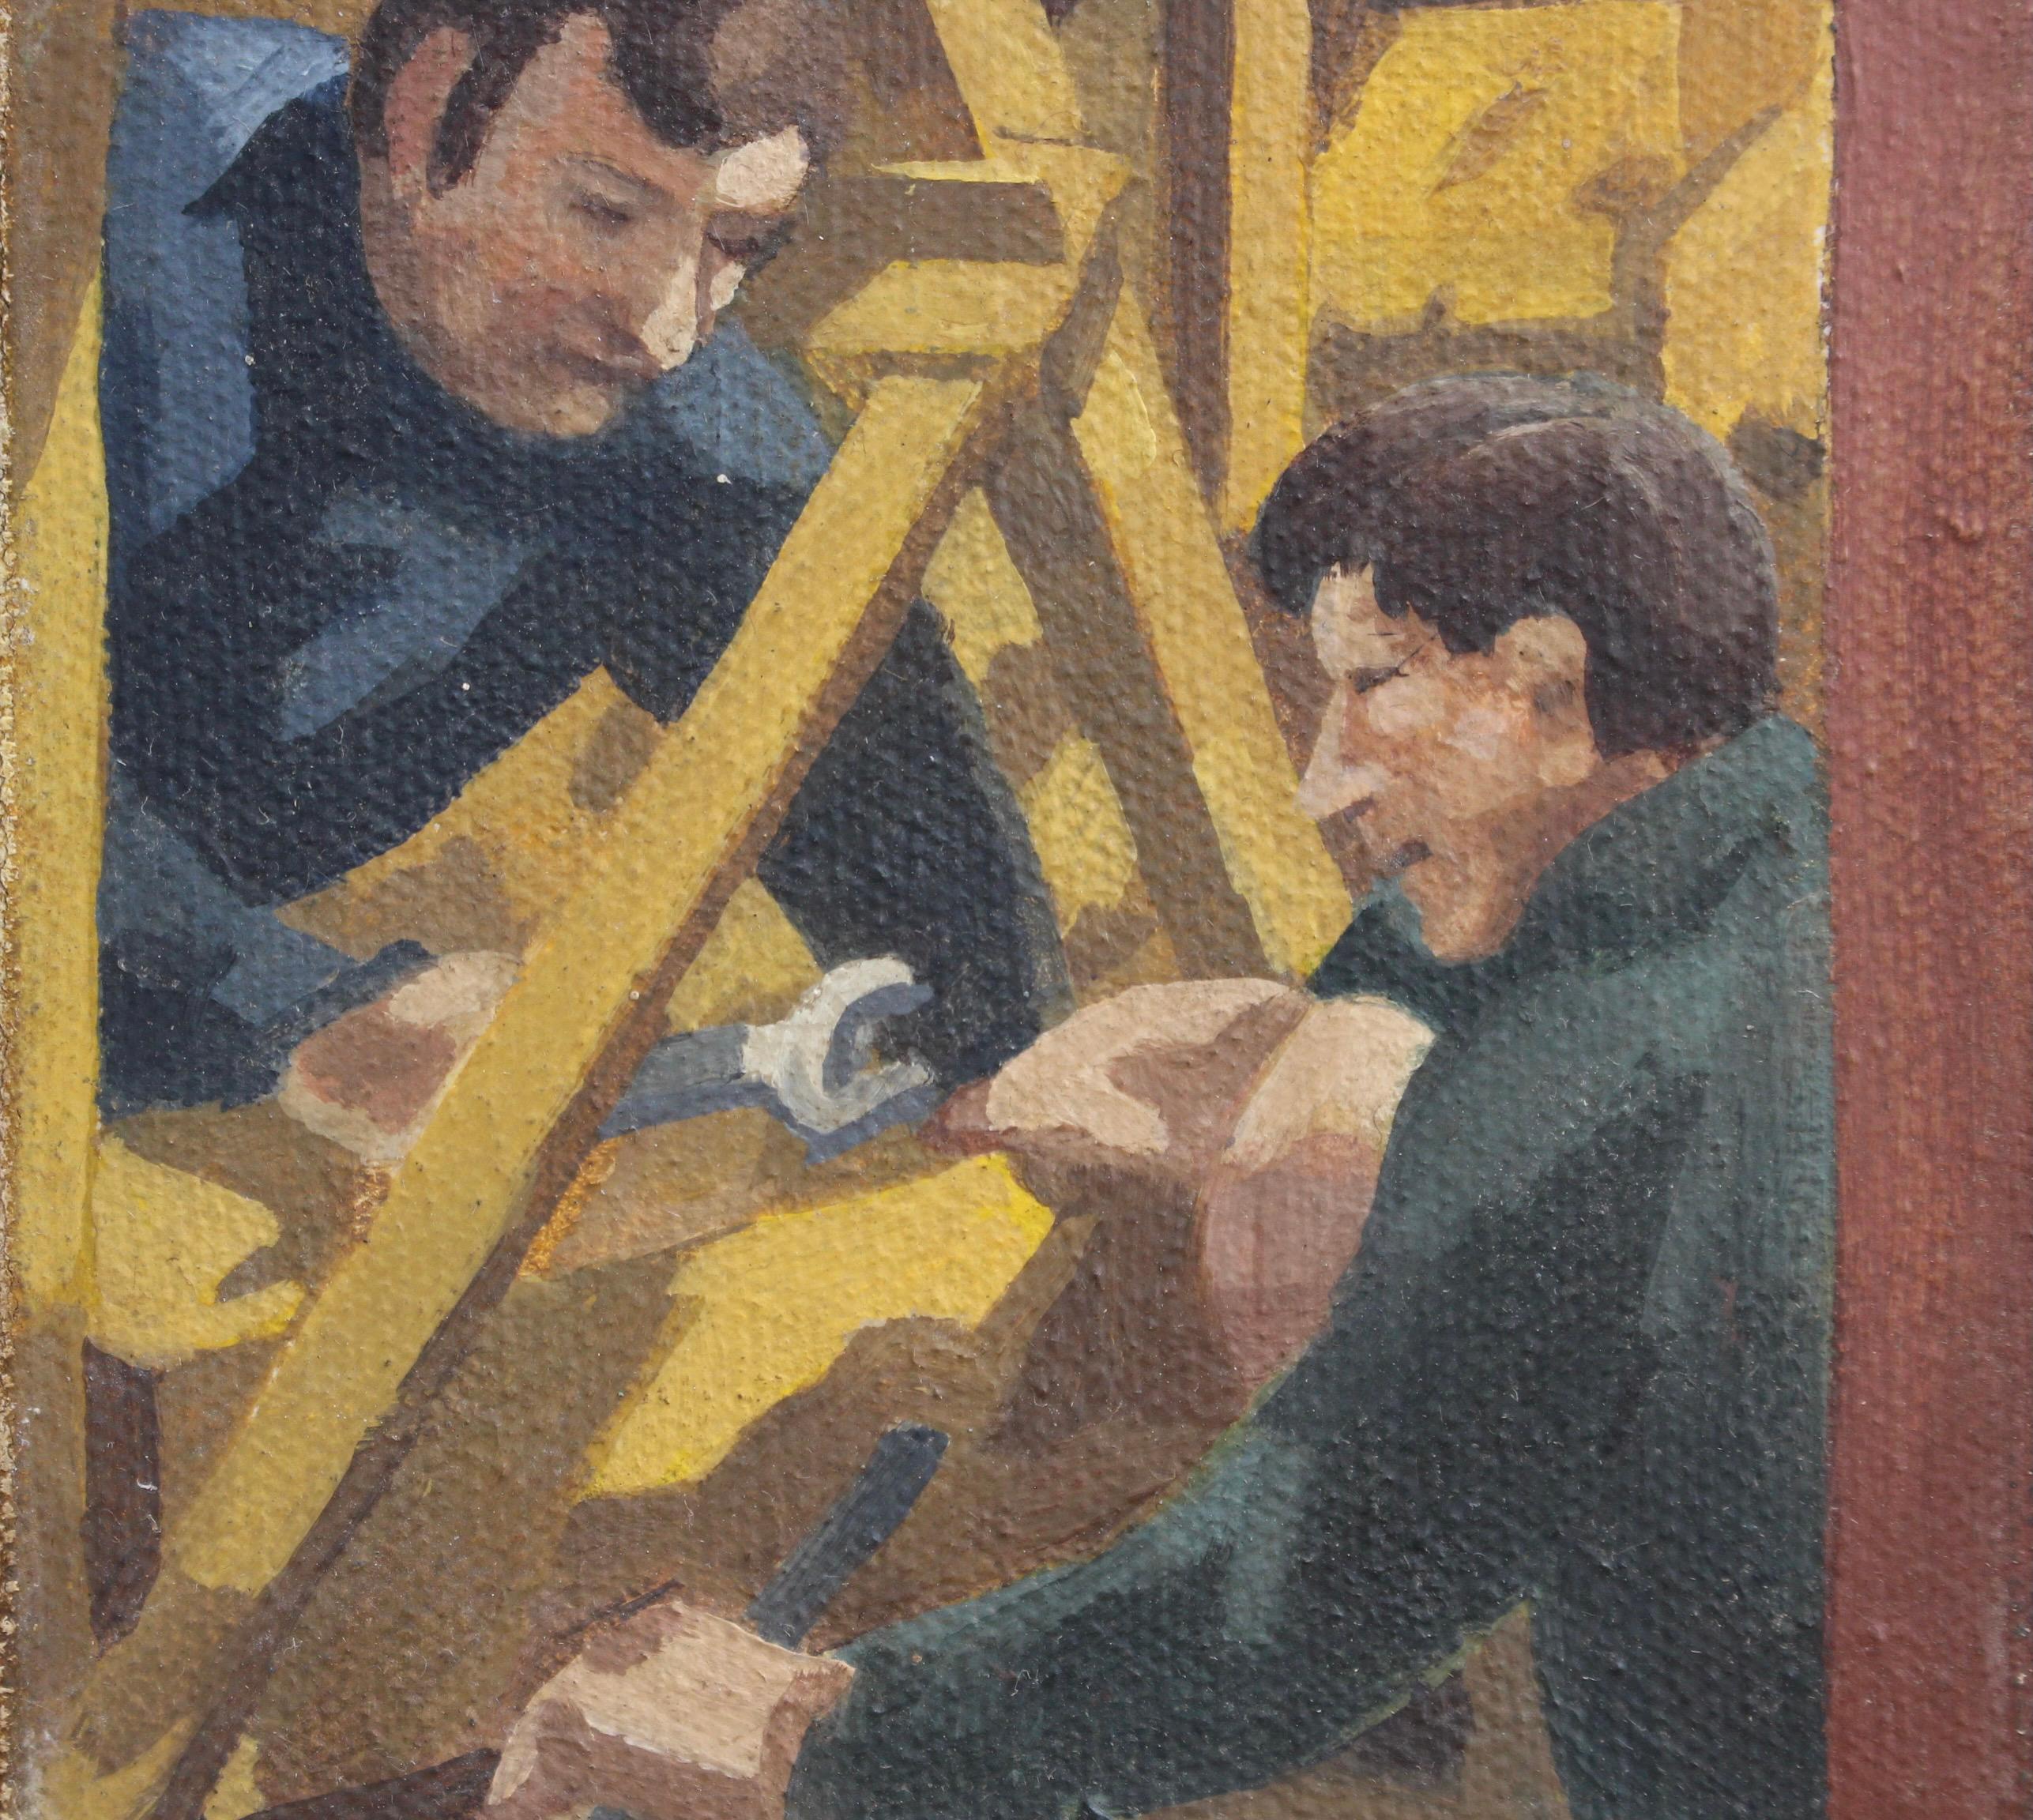 Men Working on a Concrete Crushing Machine - Brown Portrait Painting by John James